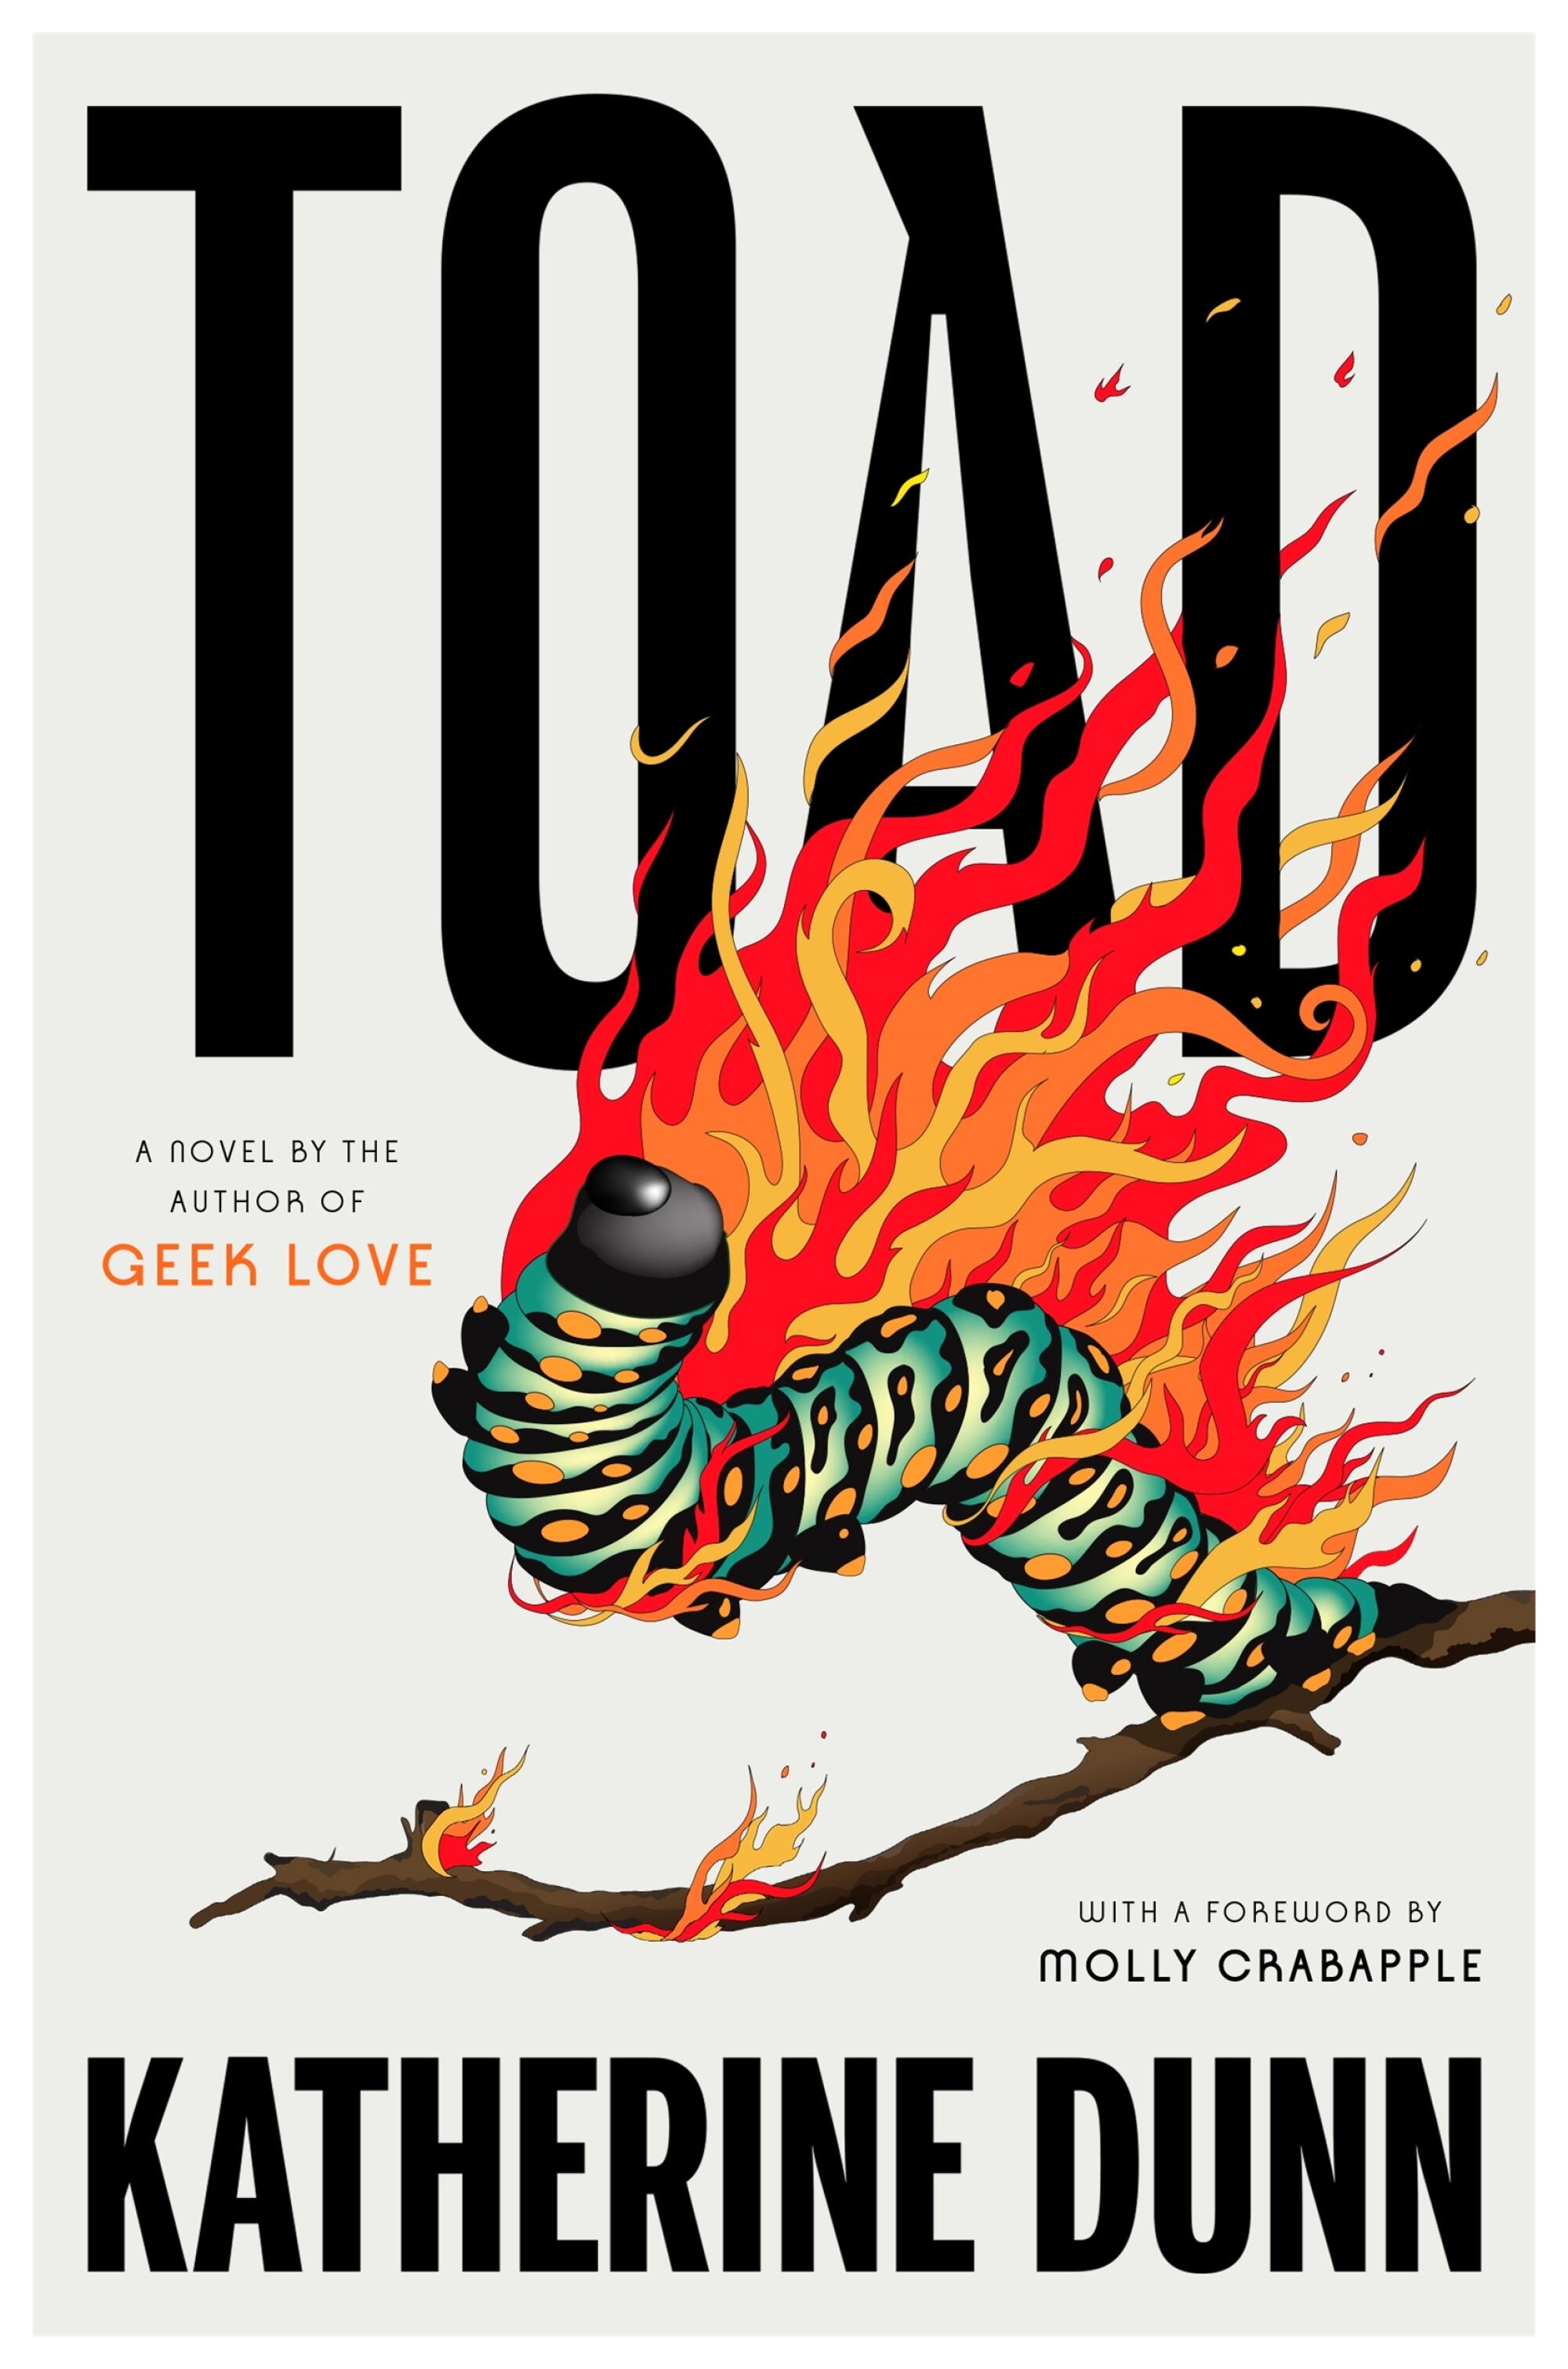 Book cover for "Toad," by Katherine Dunn shows animated caterpillar on fire 